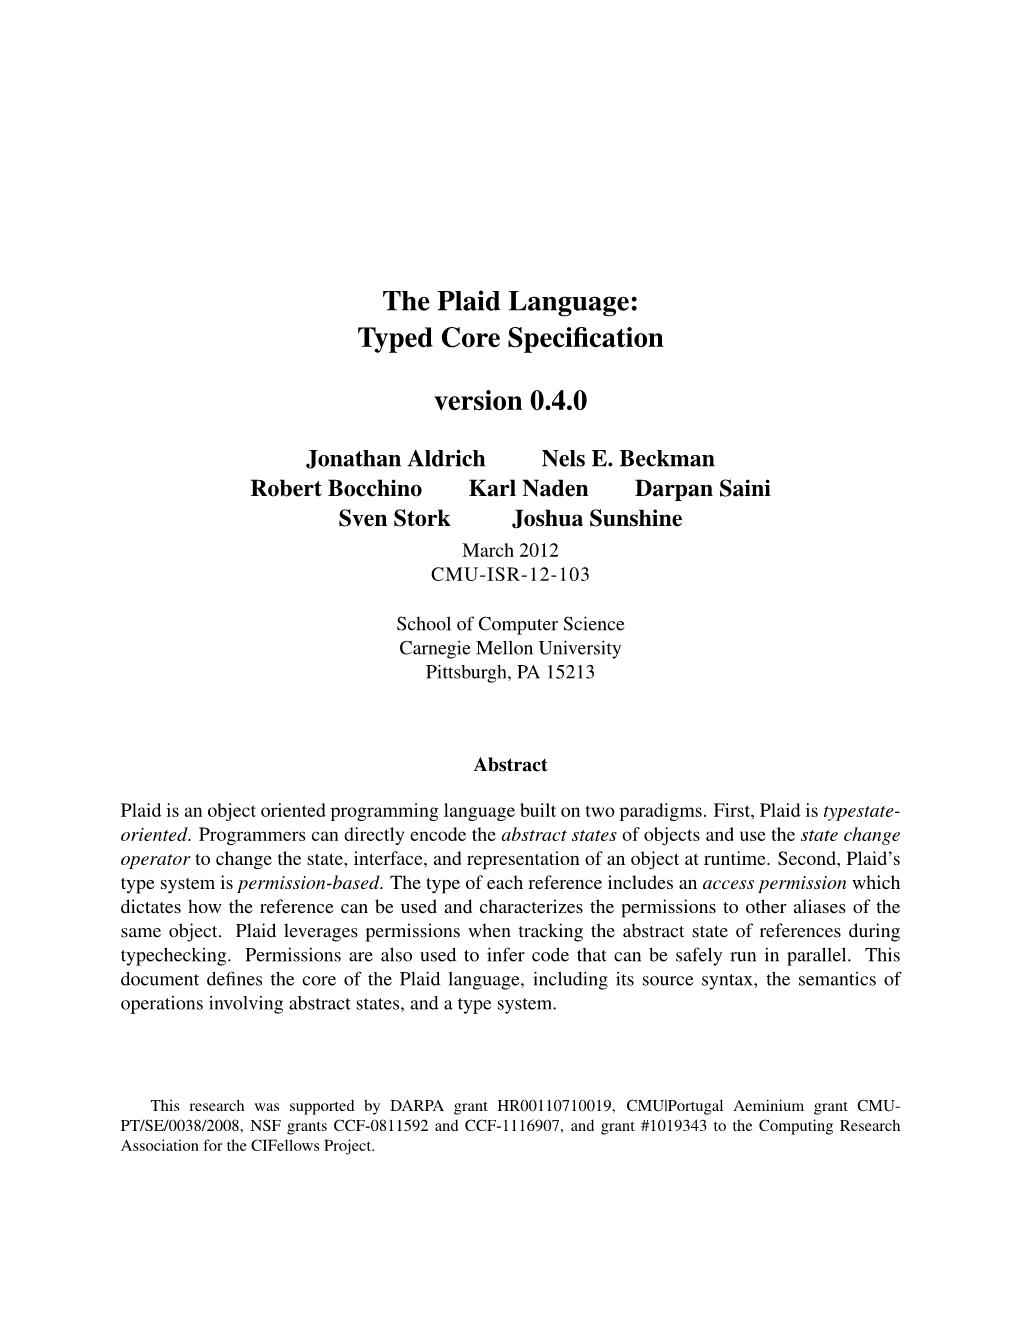 The Plaid Language: Typed Core Specification Version 0.4.0